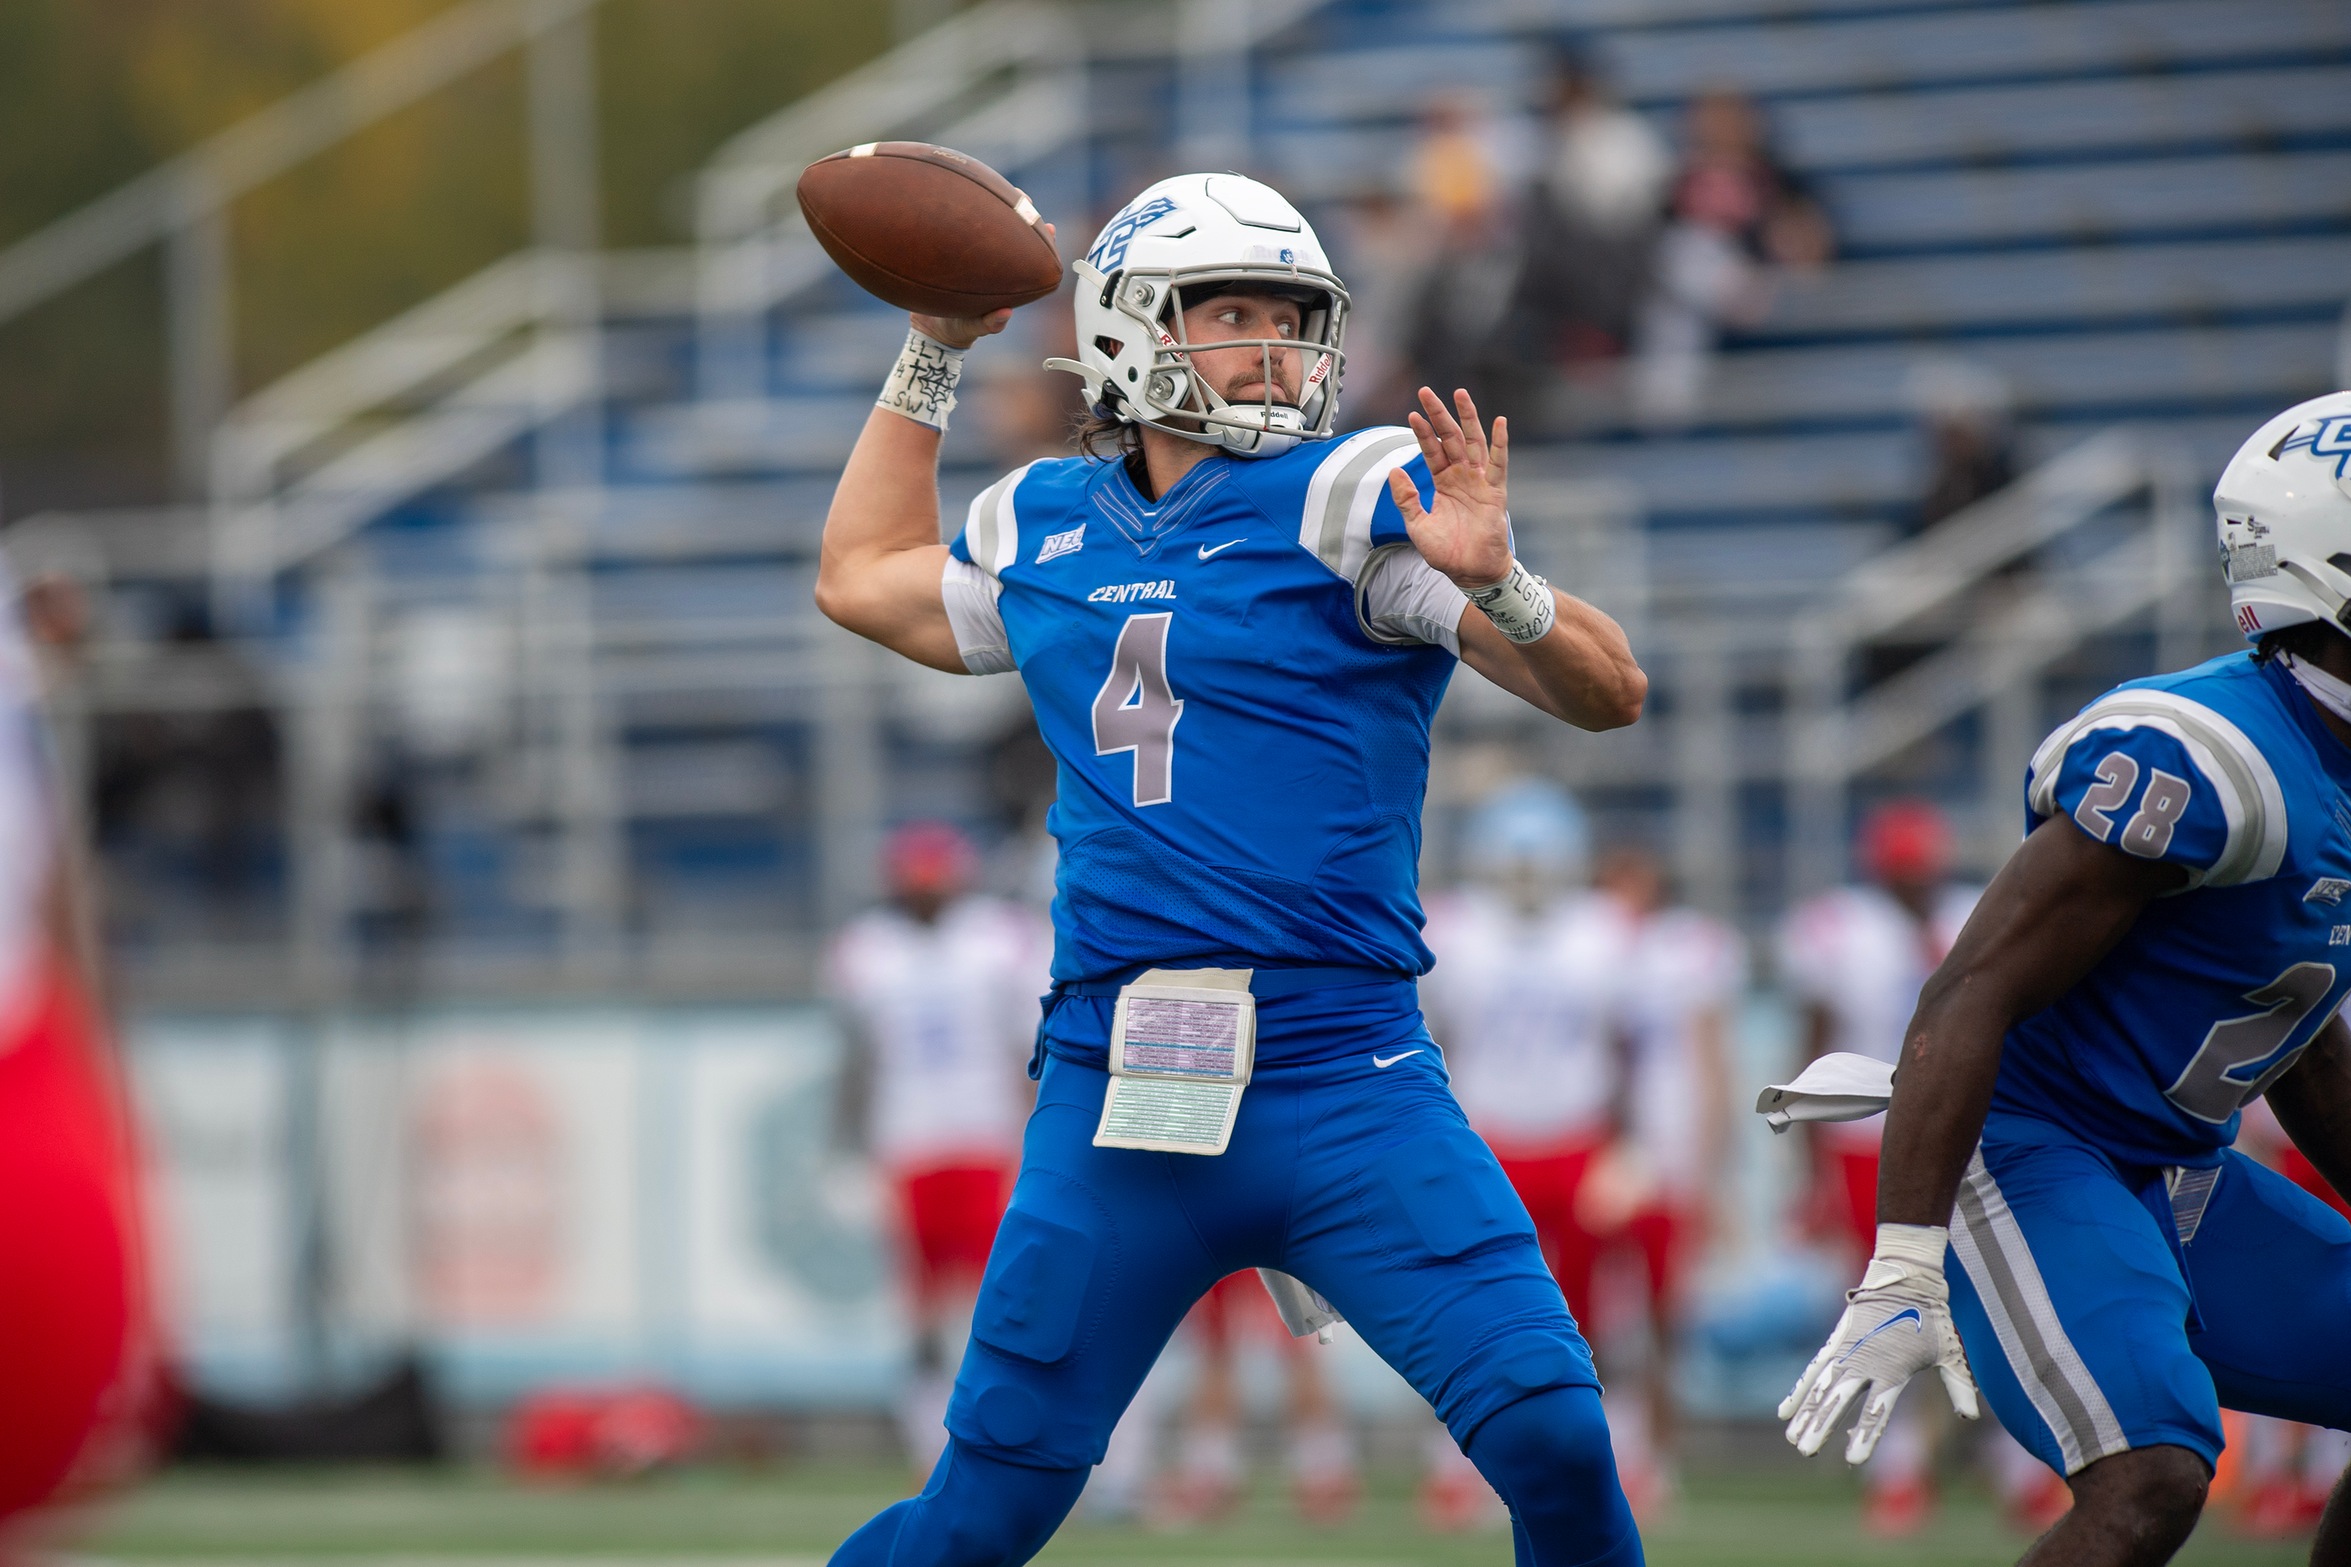 Matt Jenner completed 15 passes for 127 yards and had a 17-yard touchdown run for the Blue Devils at Duquesne on Saturday. (Photo: Steve McLaughlin)